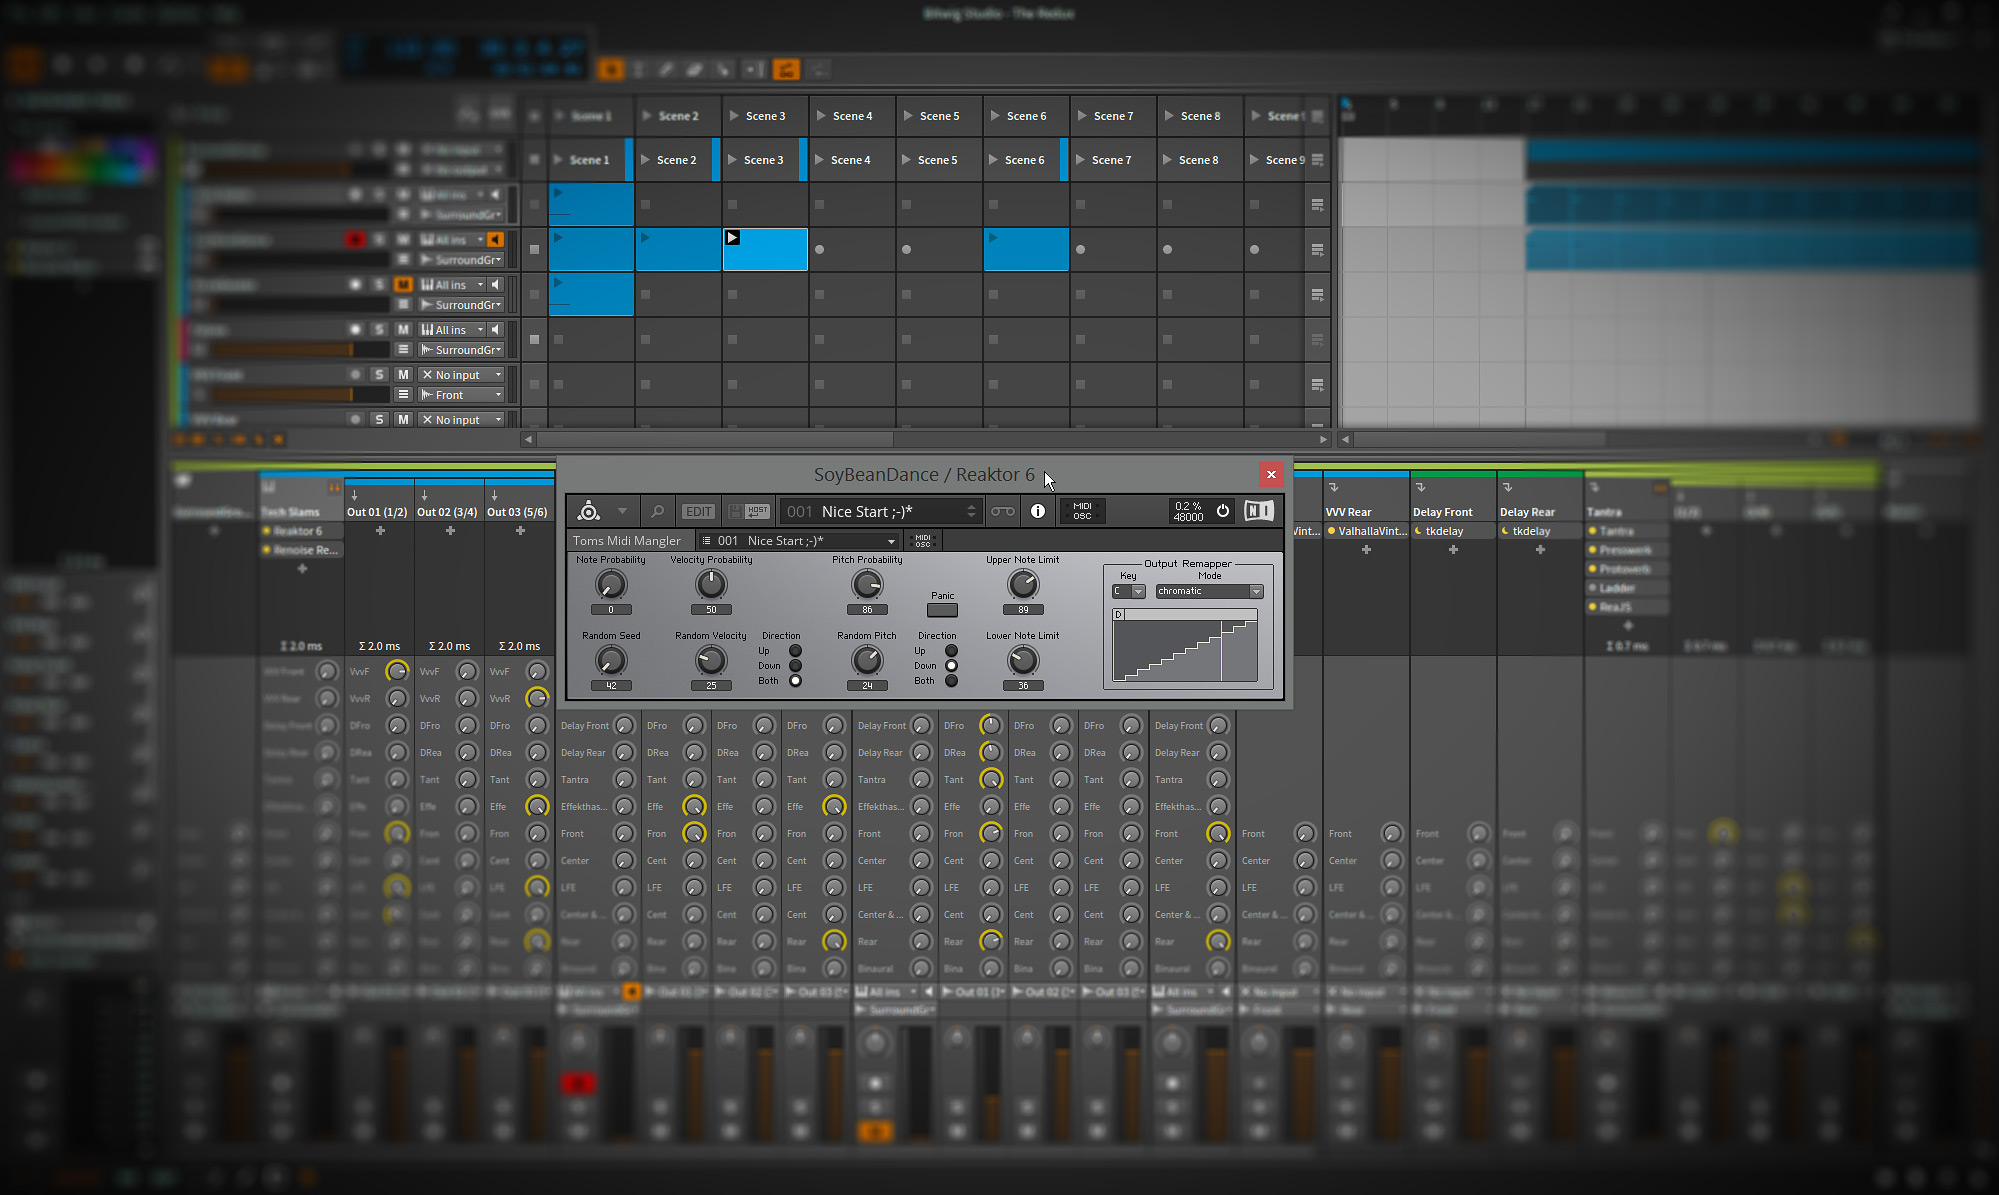 My tool for live-wrangling of Midi data for NI Reaktor 6